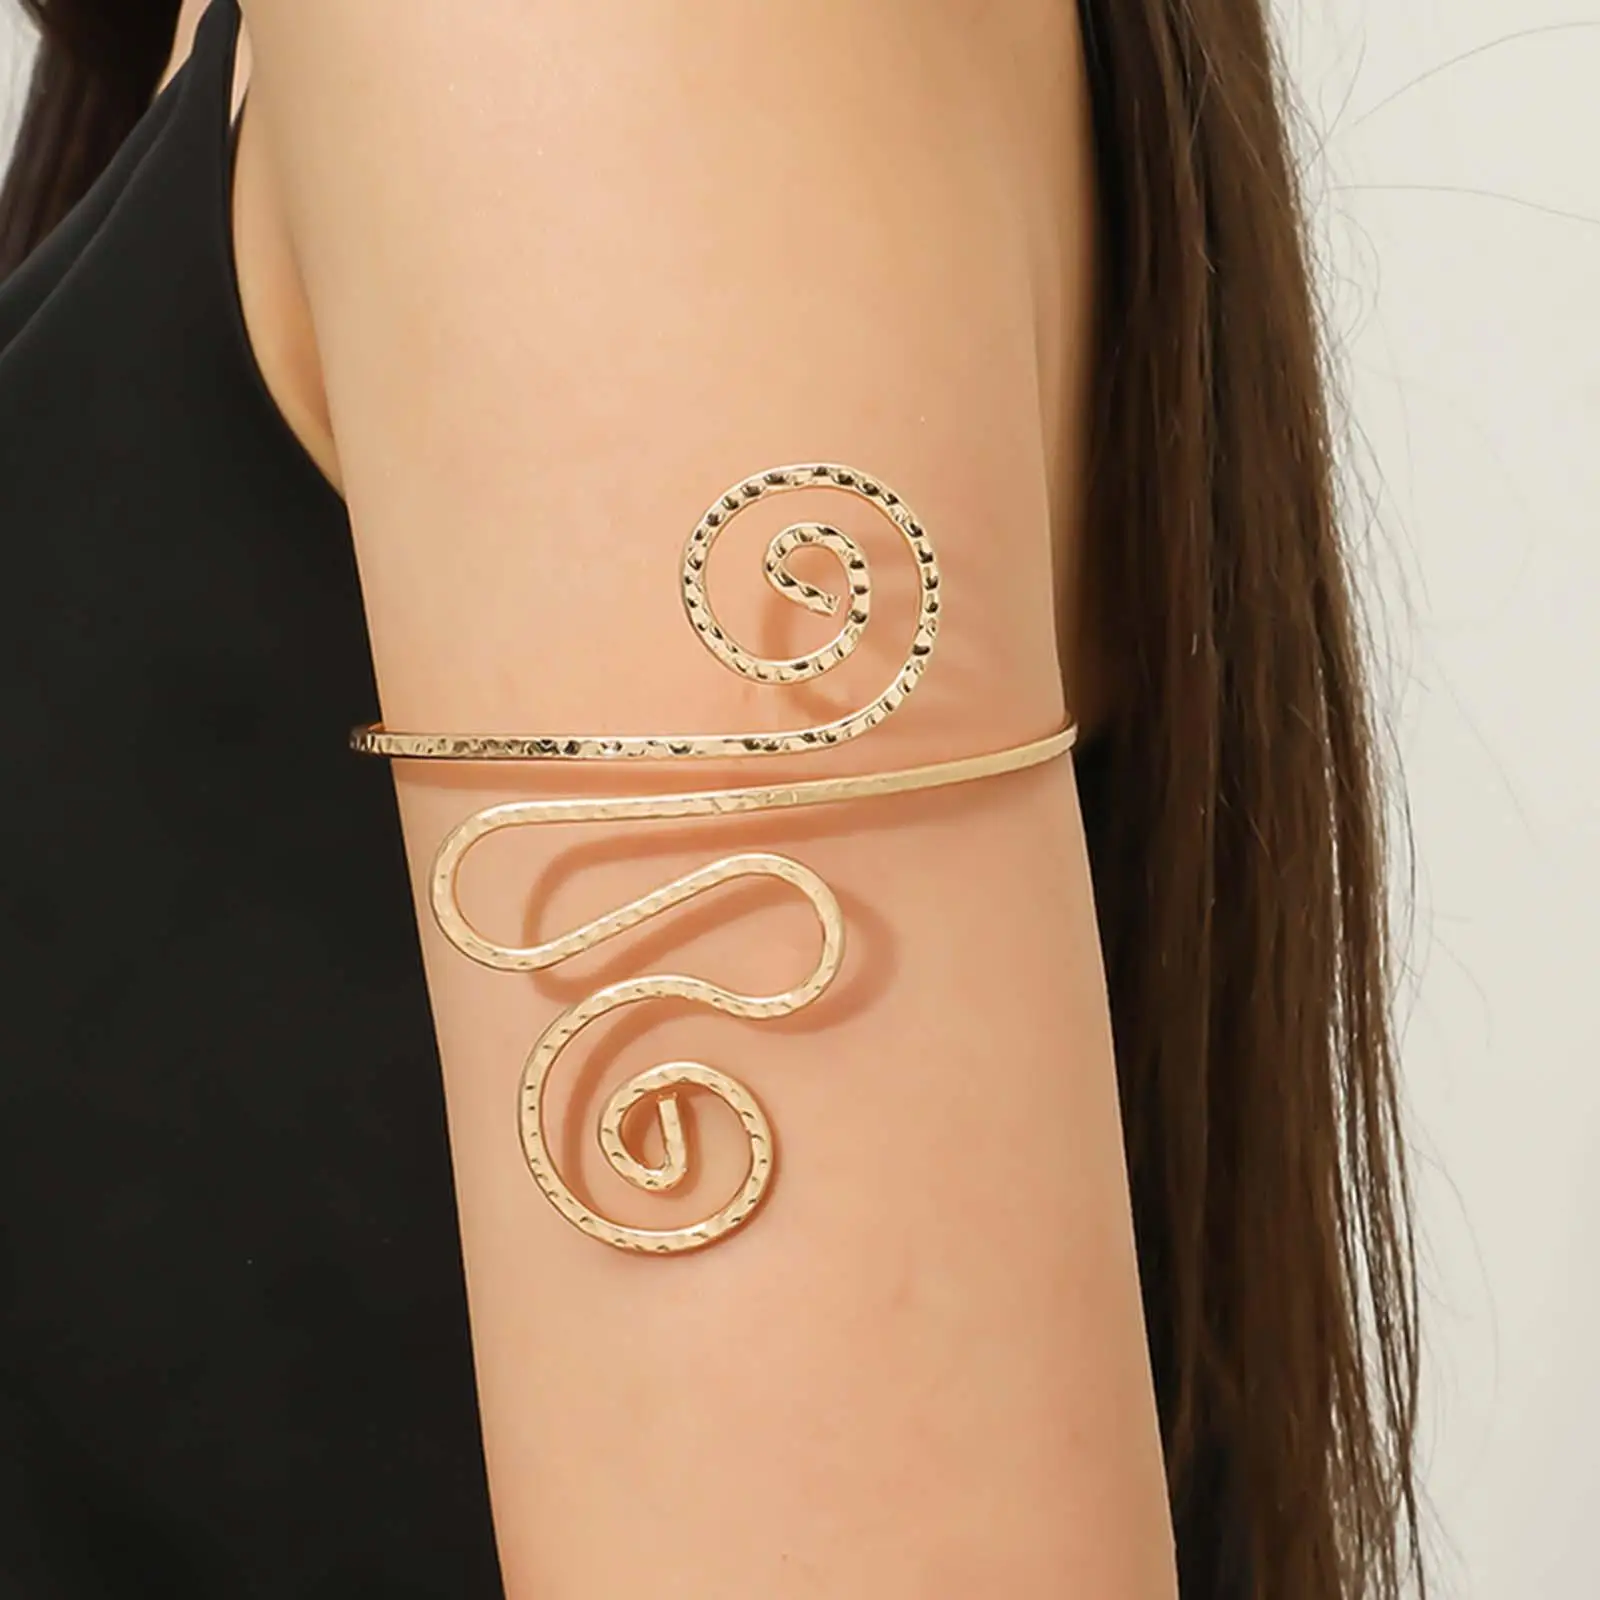 Bohemian Upper Arm Bracelet Alloy Classic Spiral Shape Arm Band Fashion Arm cuffs Bangle for Banquet Wedding Prom Date Party